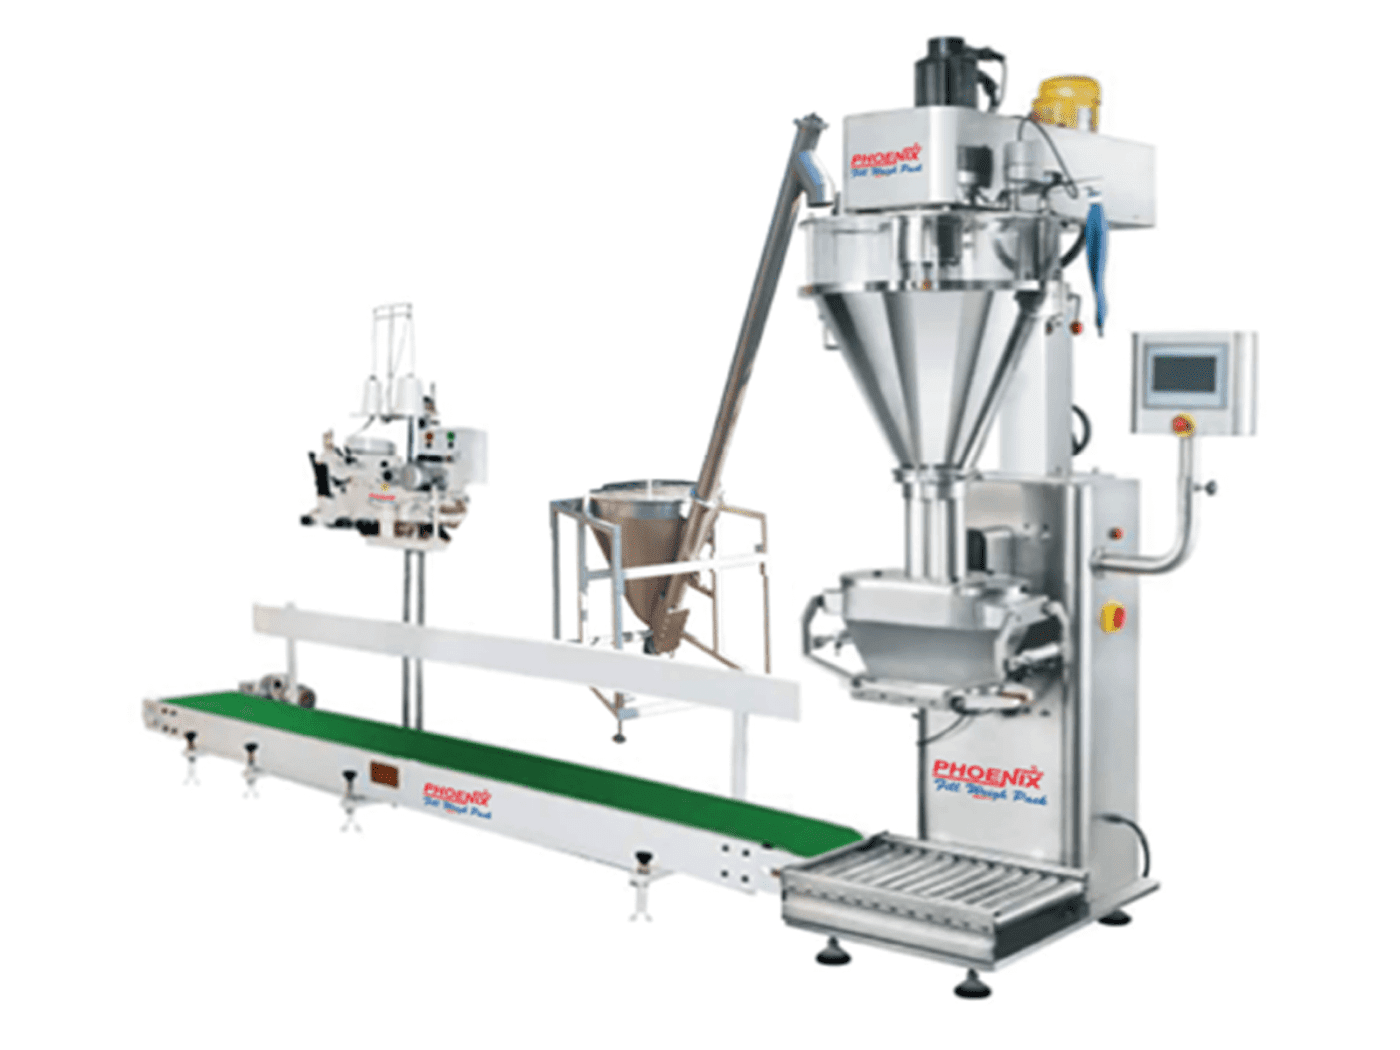 ipm-25a-woven-bag-packing-machine-with-auger-filler-stiching-machine-007